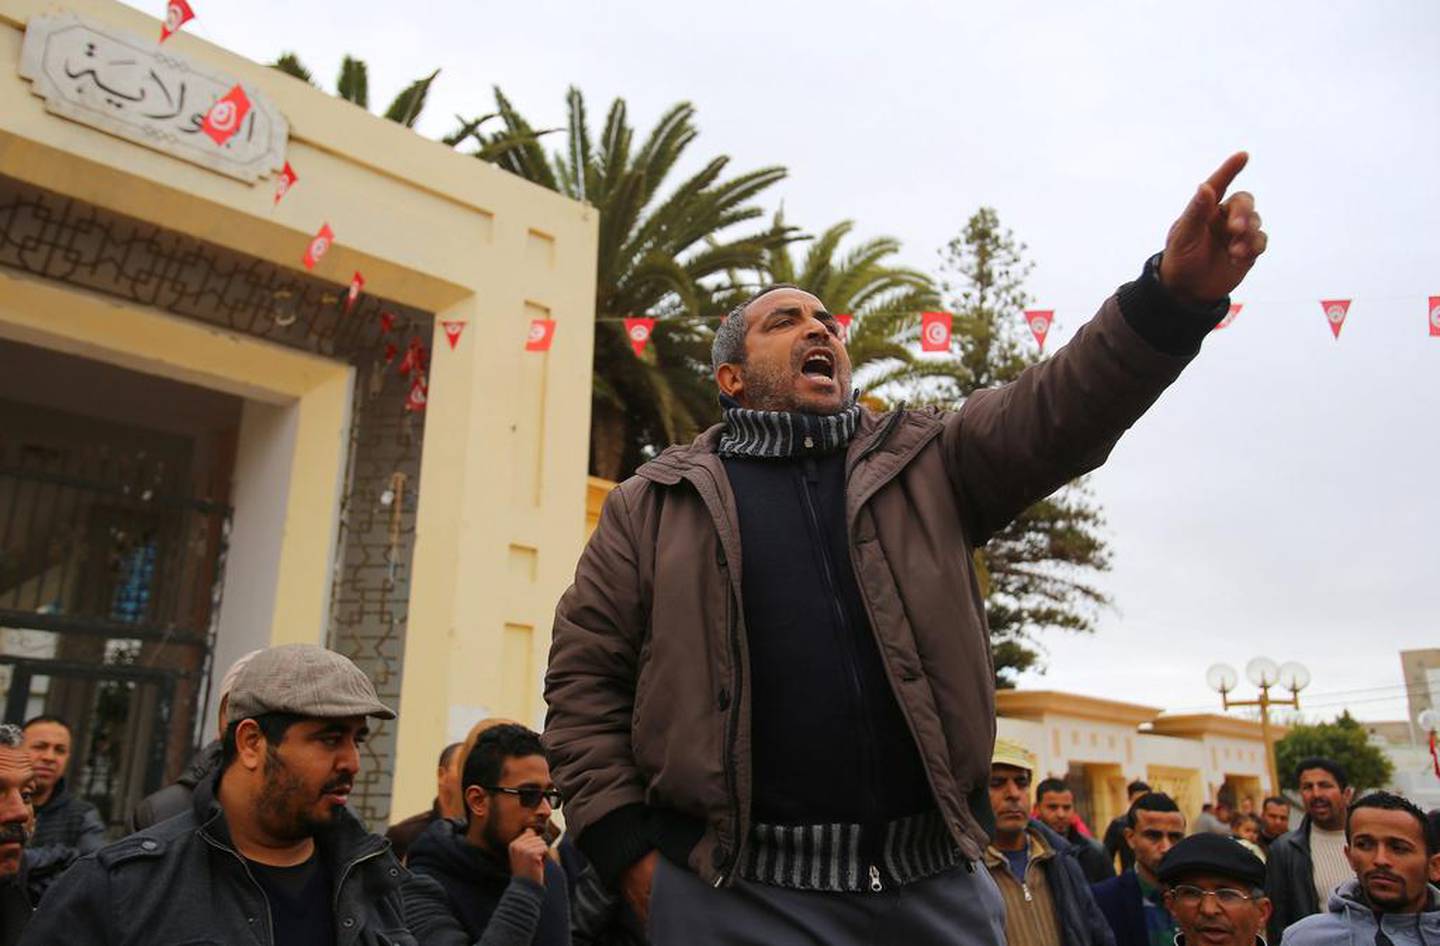 Tunisians call for better employment opportunities during a demonstration in Sidi Bouzid in January 2017. Reuters  